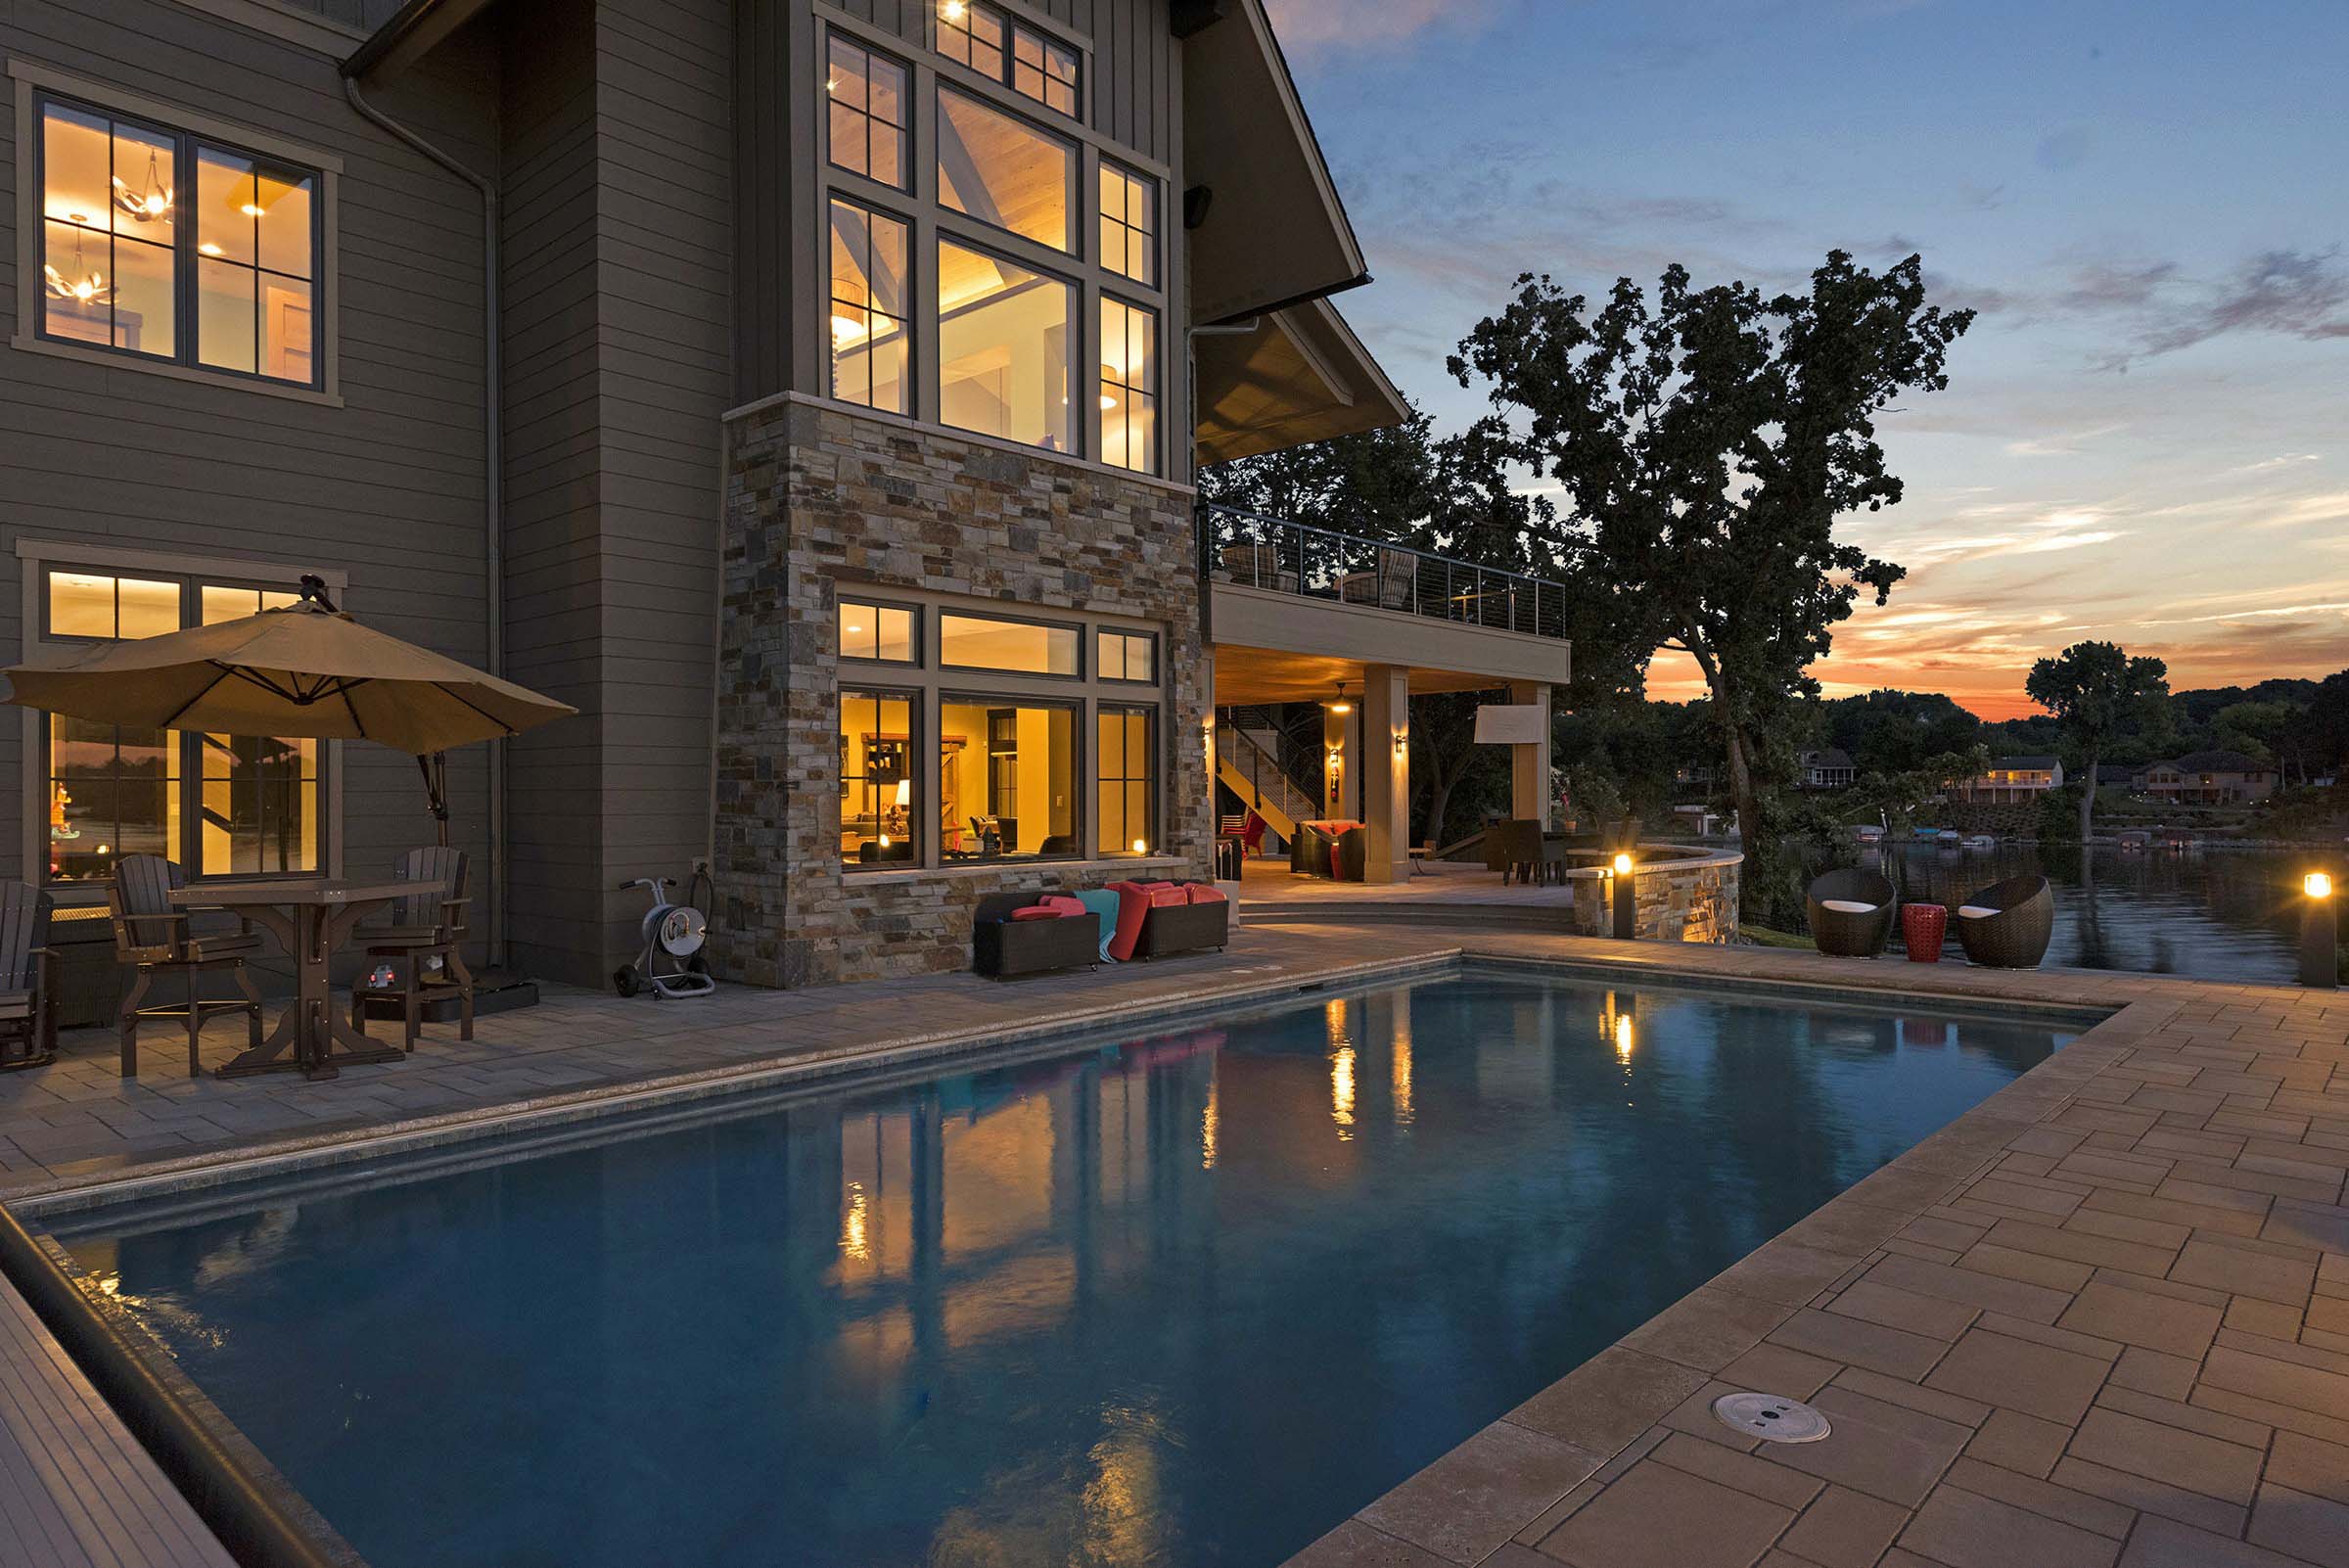 A mesmerizing home with a tranquil pool and inviting patio, enhanced by the tranquil beauty of dusk.